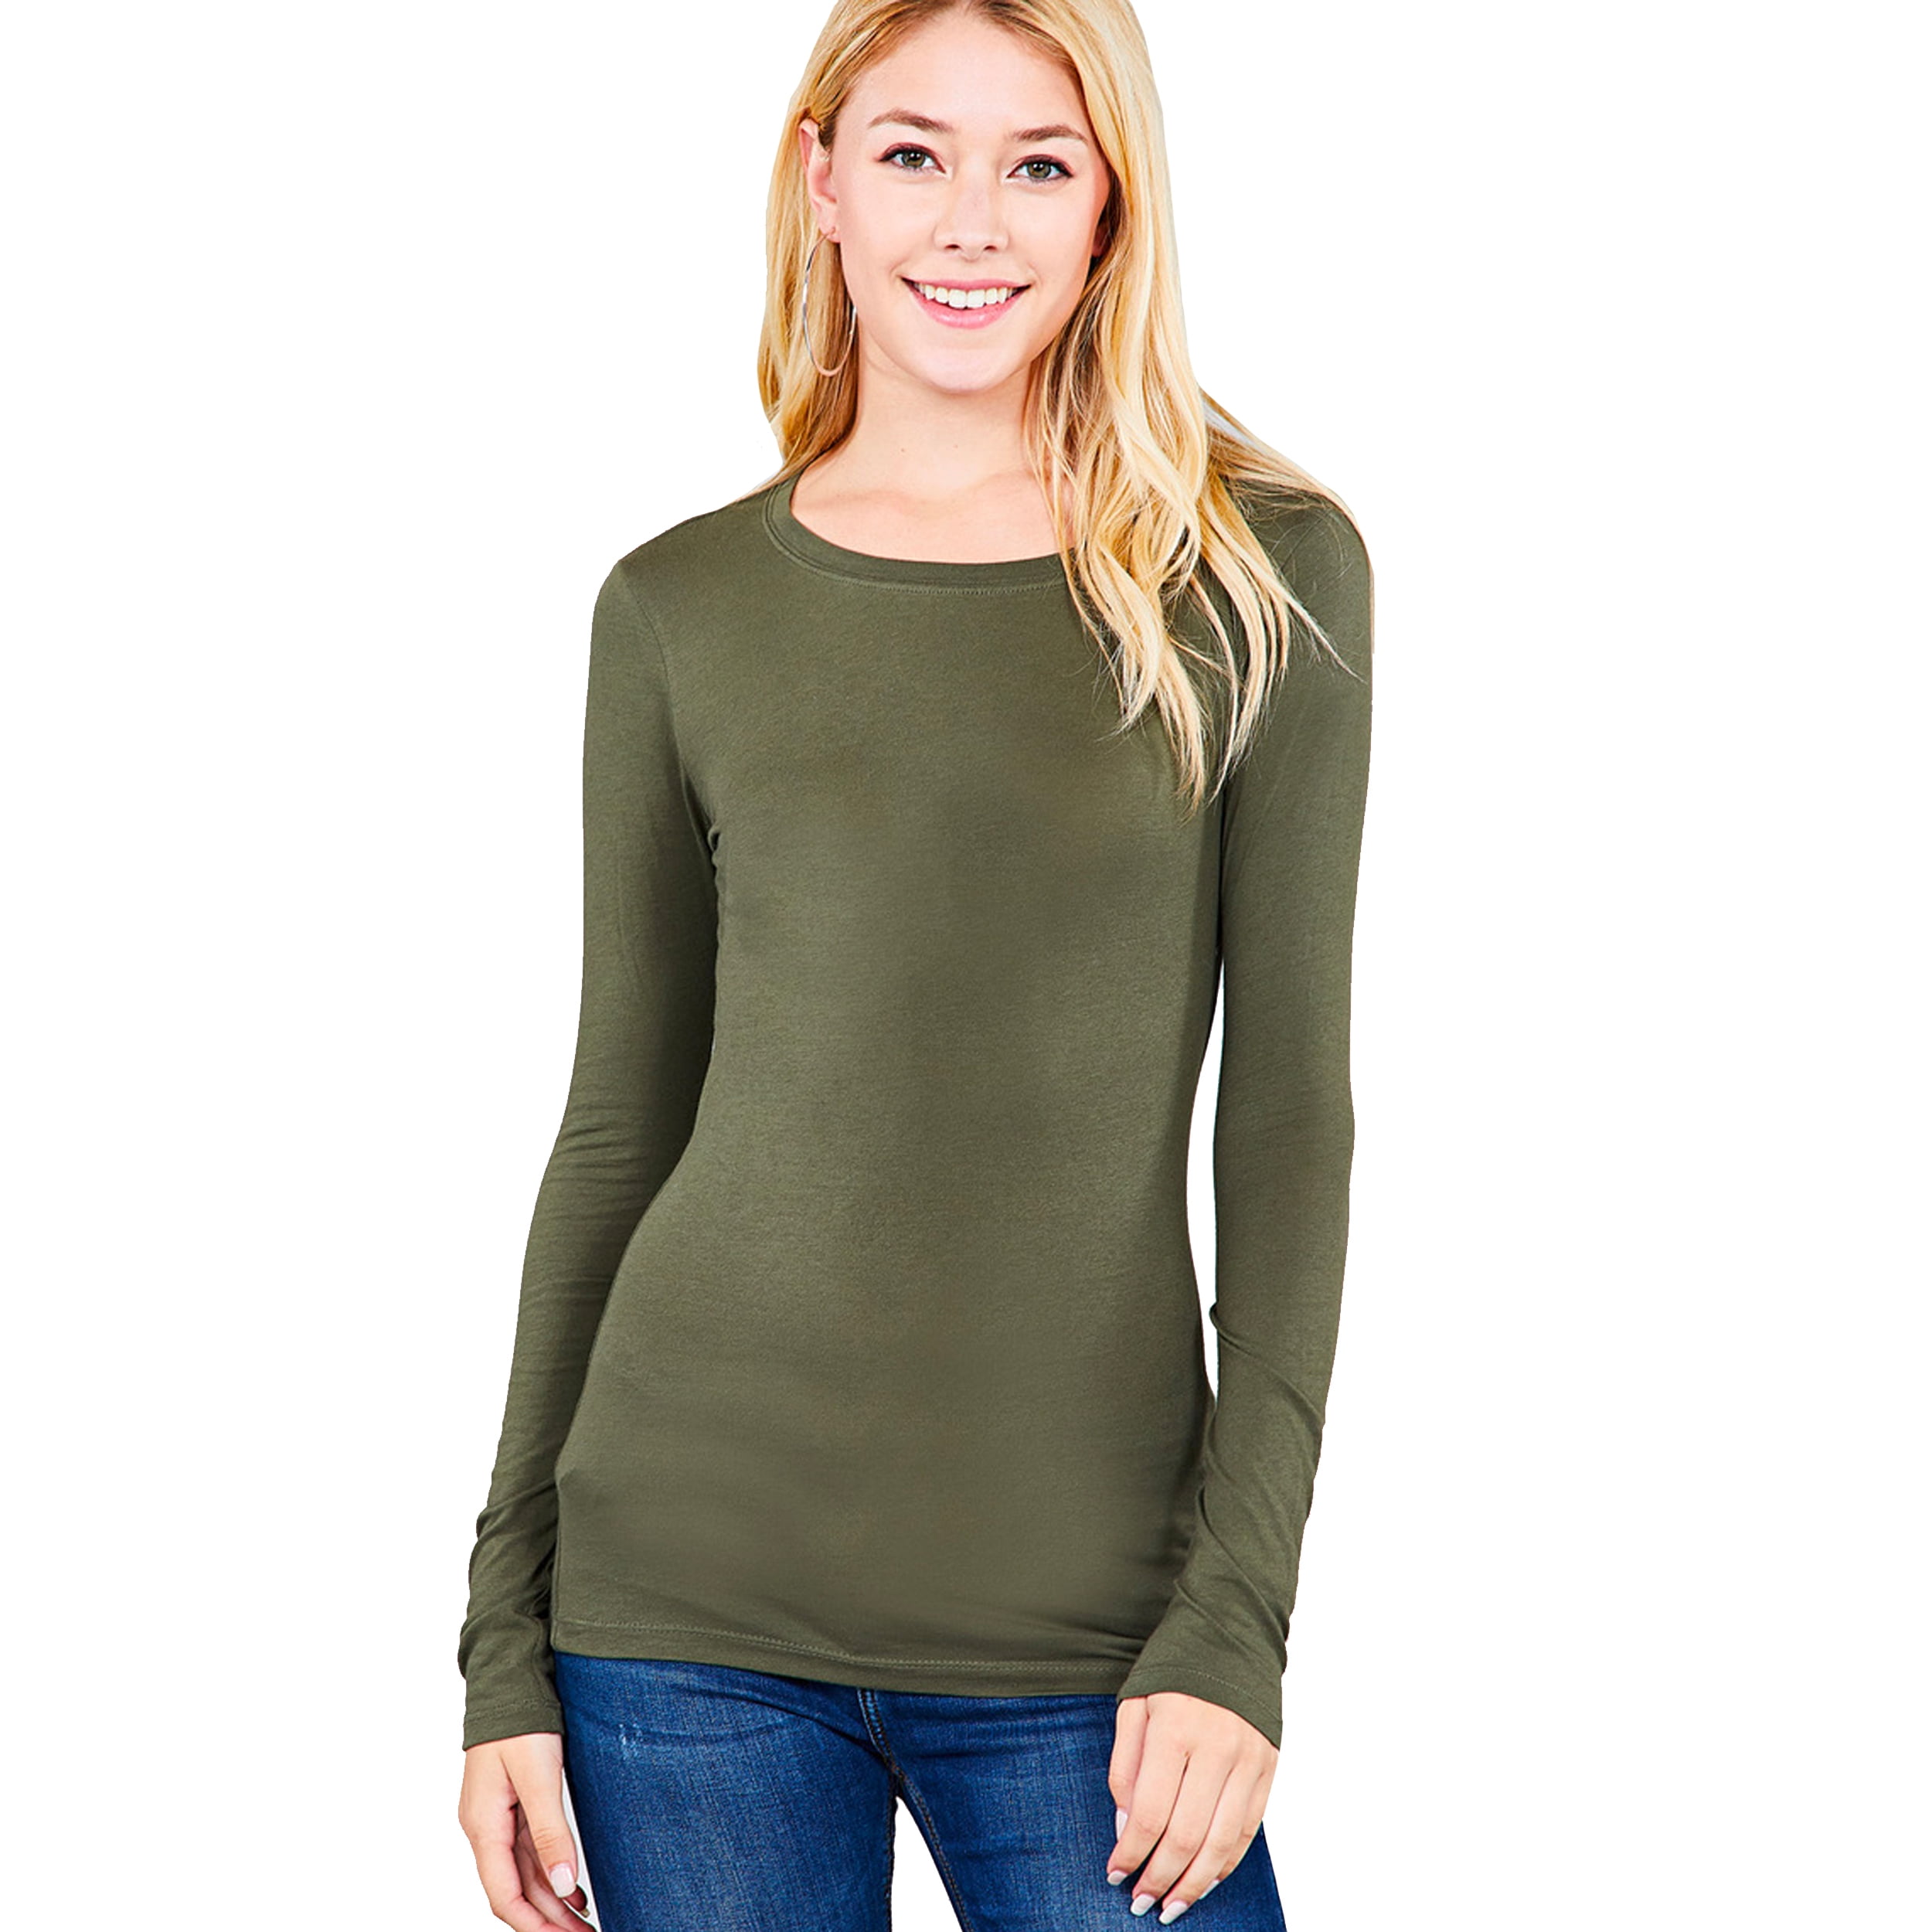 Women's Long Sleeve Round Neck Fitted Top Basic T Shirts (FAST & FREE SHIPPING)